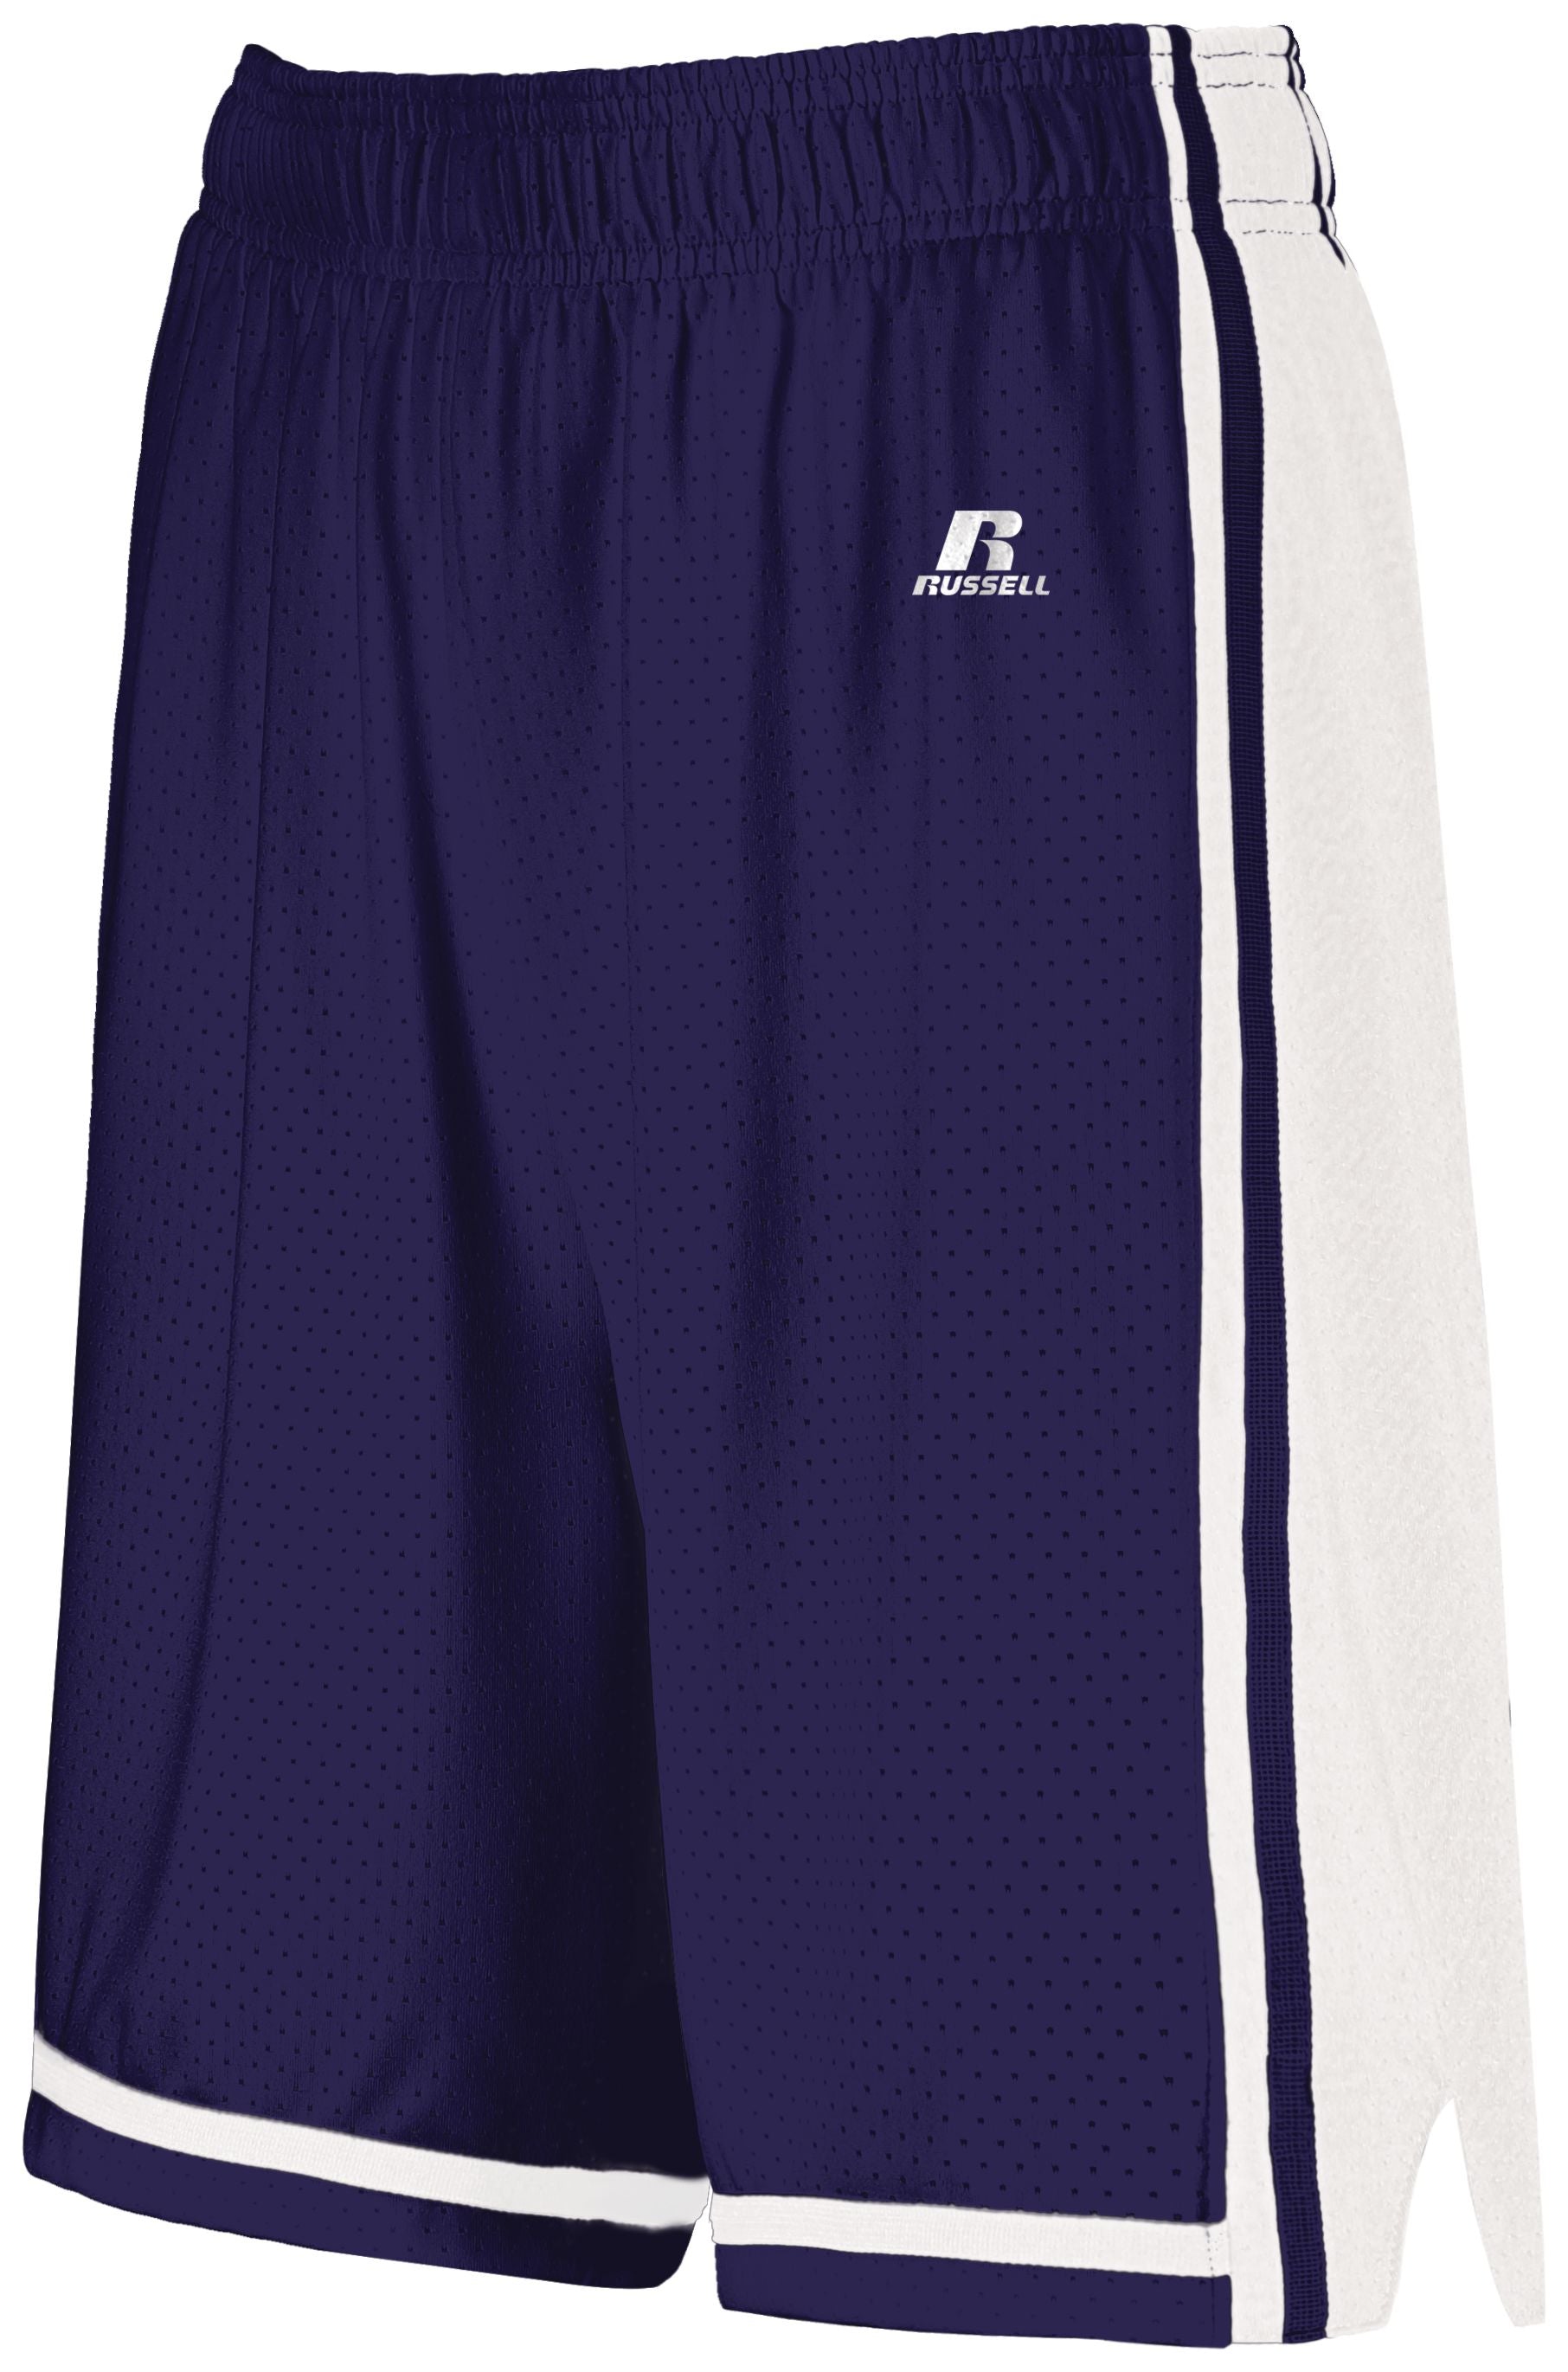 Russell Athletic Ladies Legacy Basketball Shorts in Purple/White  -Part of the Ladies, Ladies-Shorts, Basketball, Russell-Athletic-Products, All-Sports, All-Sports-1 product lines at KanaleyCreations.com